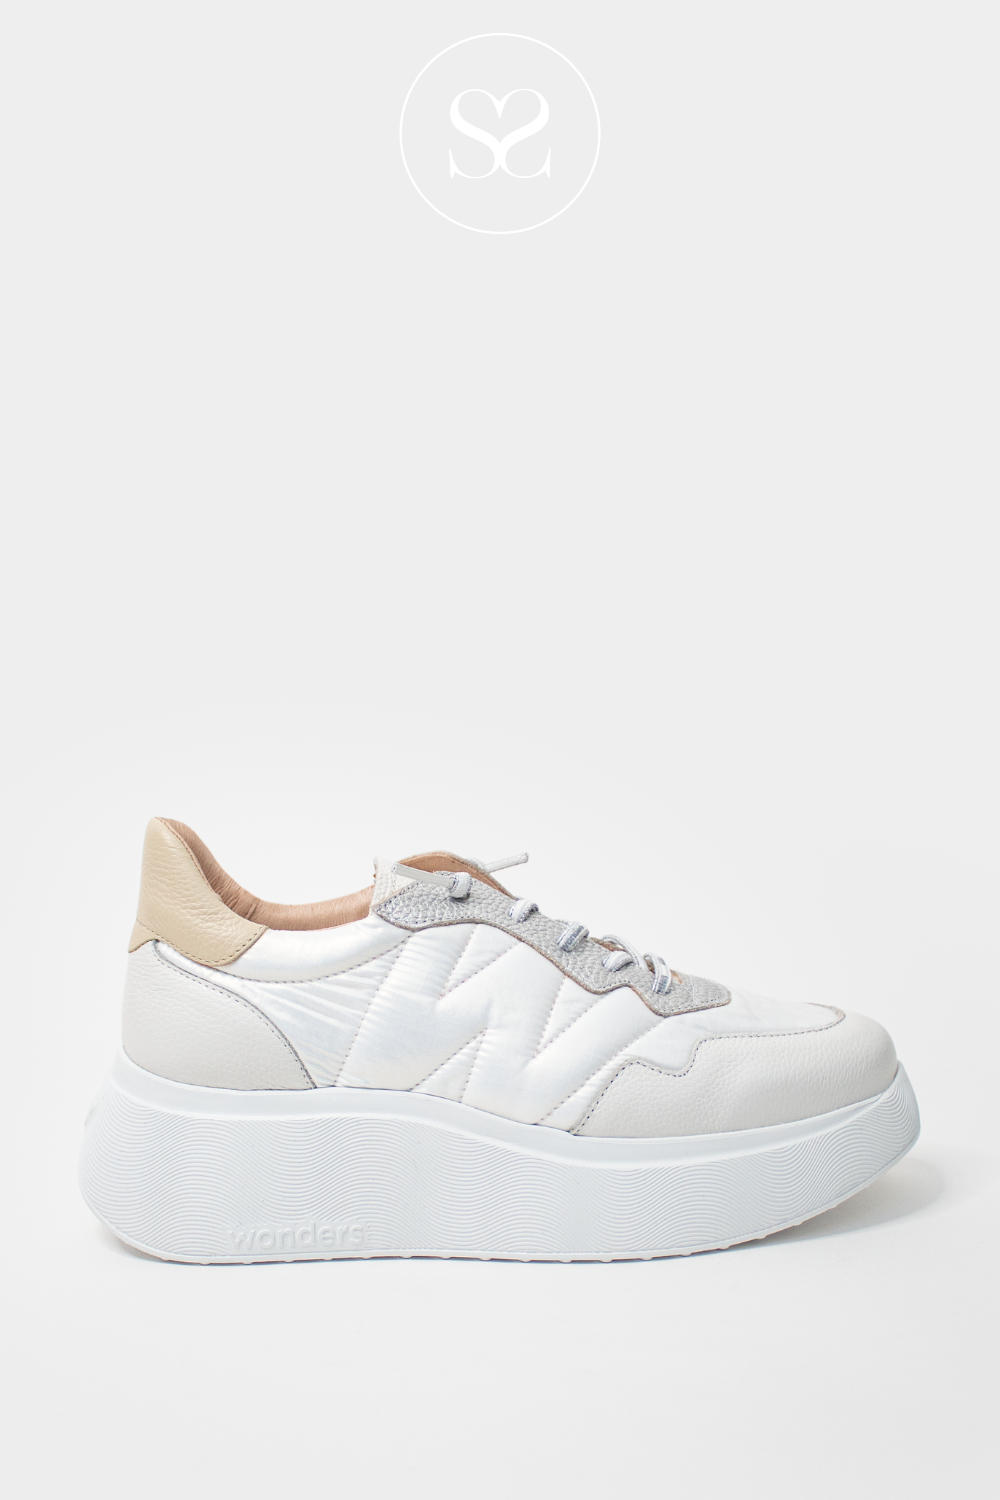 WONDERS A-3602 WHITE LEATHER CHUNKY PULL ON TRAINERS